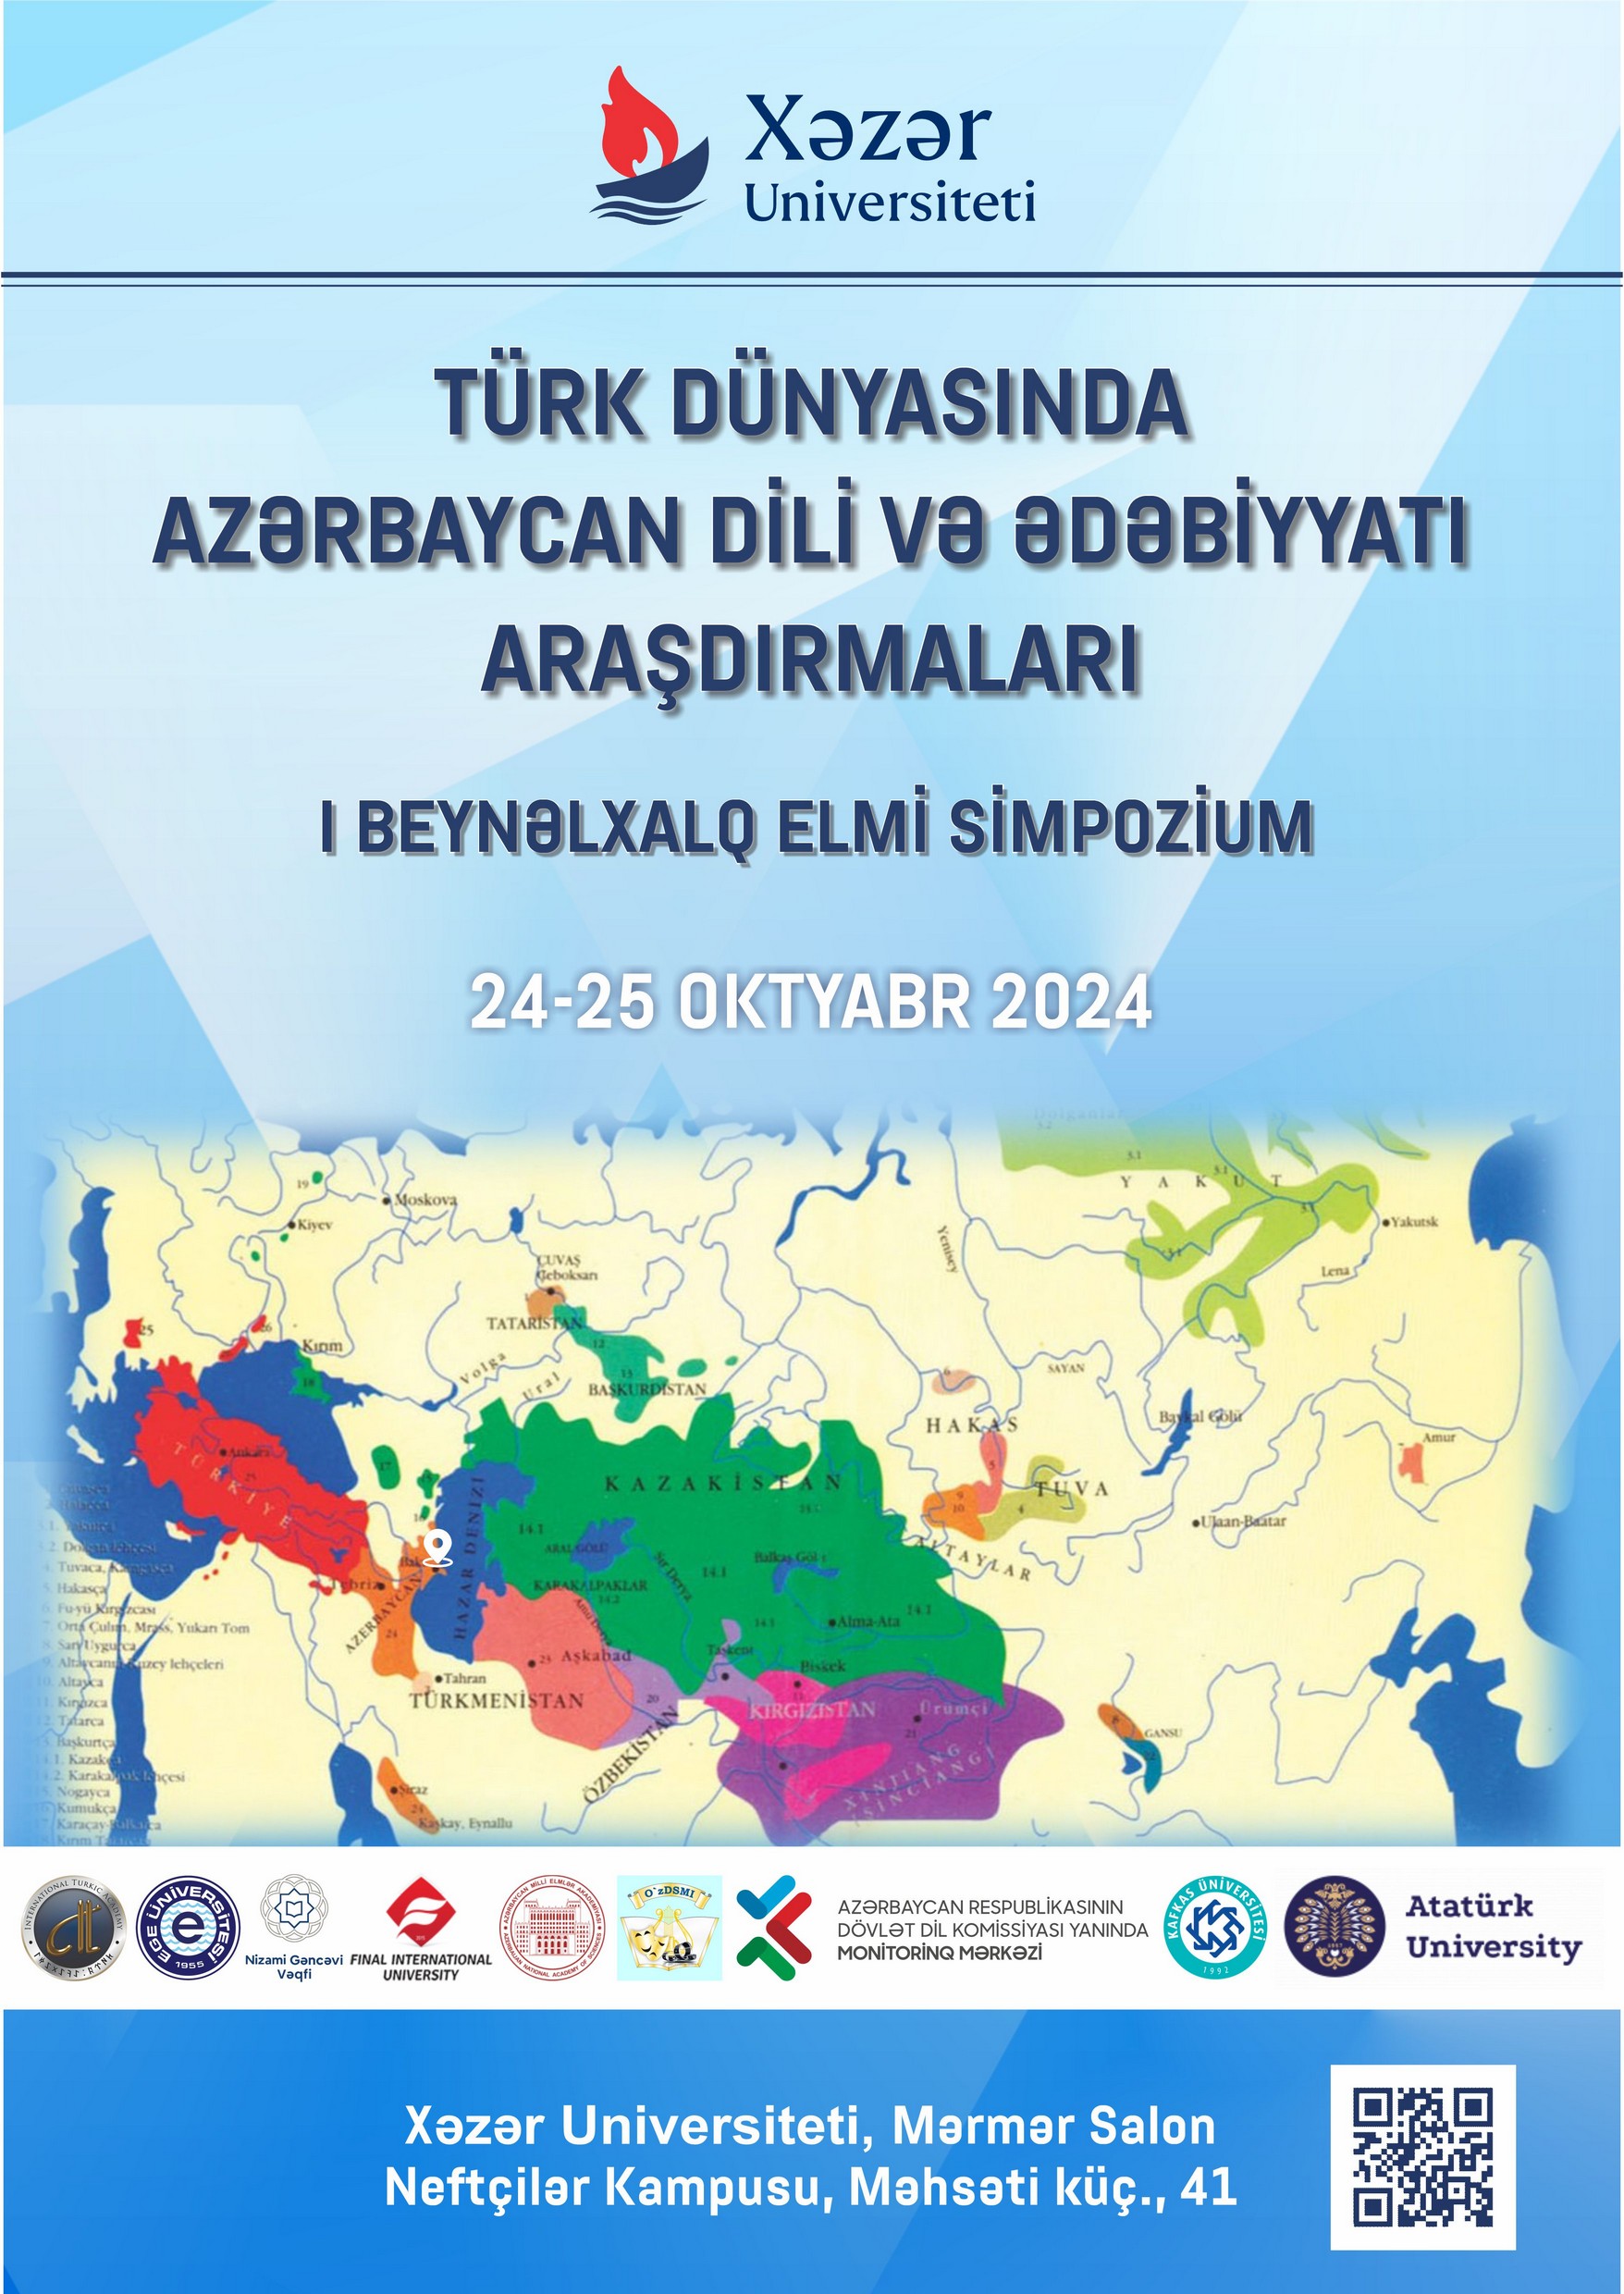 International Symposium on "Researches of Azerbaijani Language and Literature in the Turkish World" to be Held